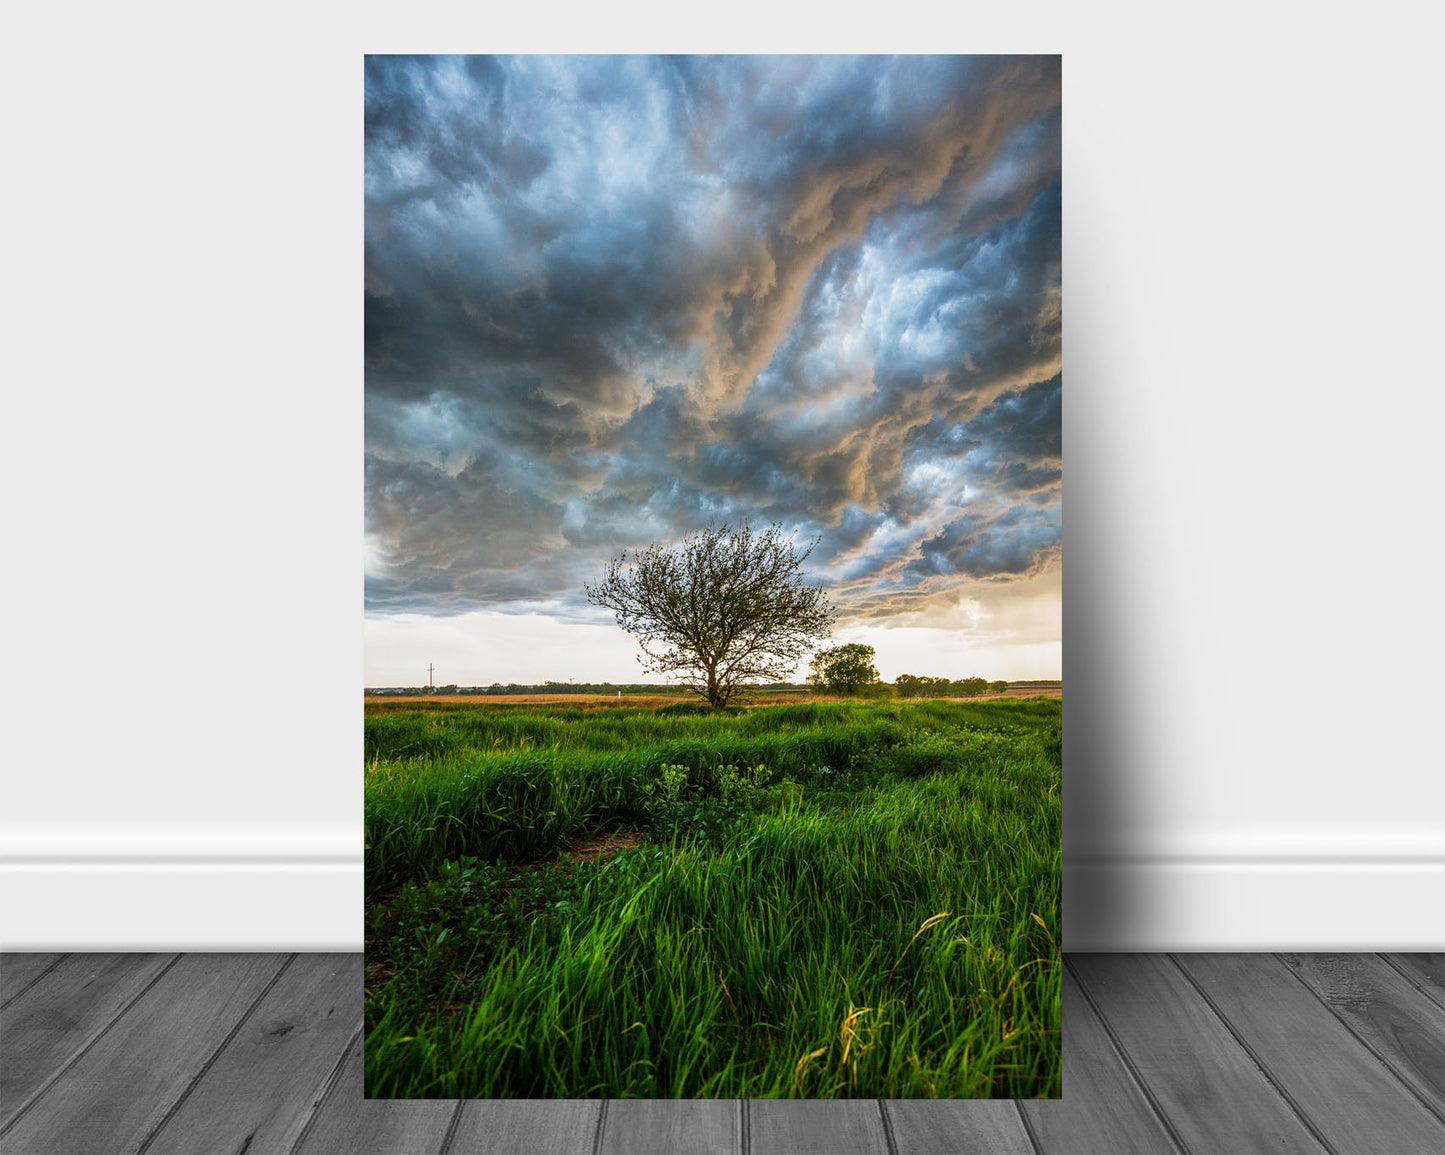 Vertical Great Plains aluminum metal print of a lone tree under storm clouds on a stormy spring day in Kansas by Sean Ramsey of Southern Plains Photography.